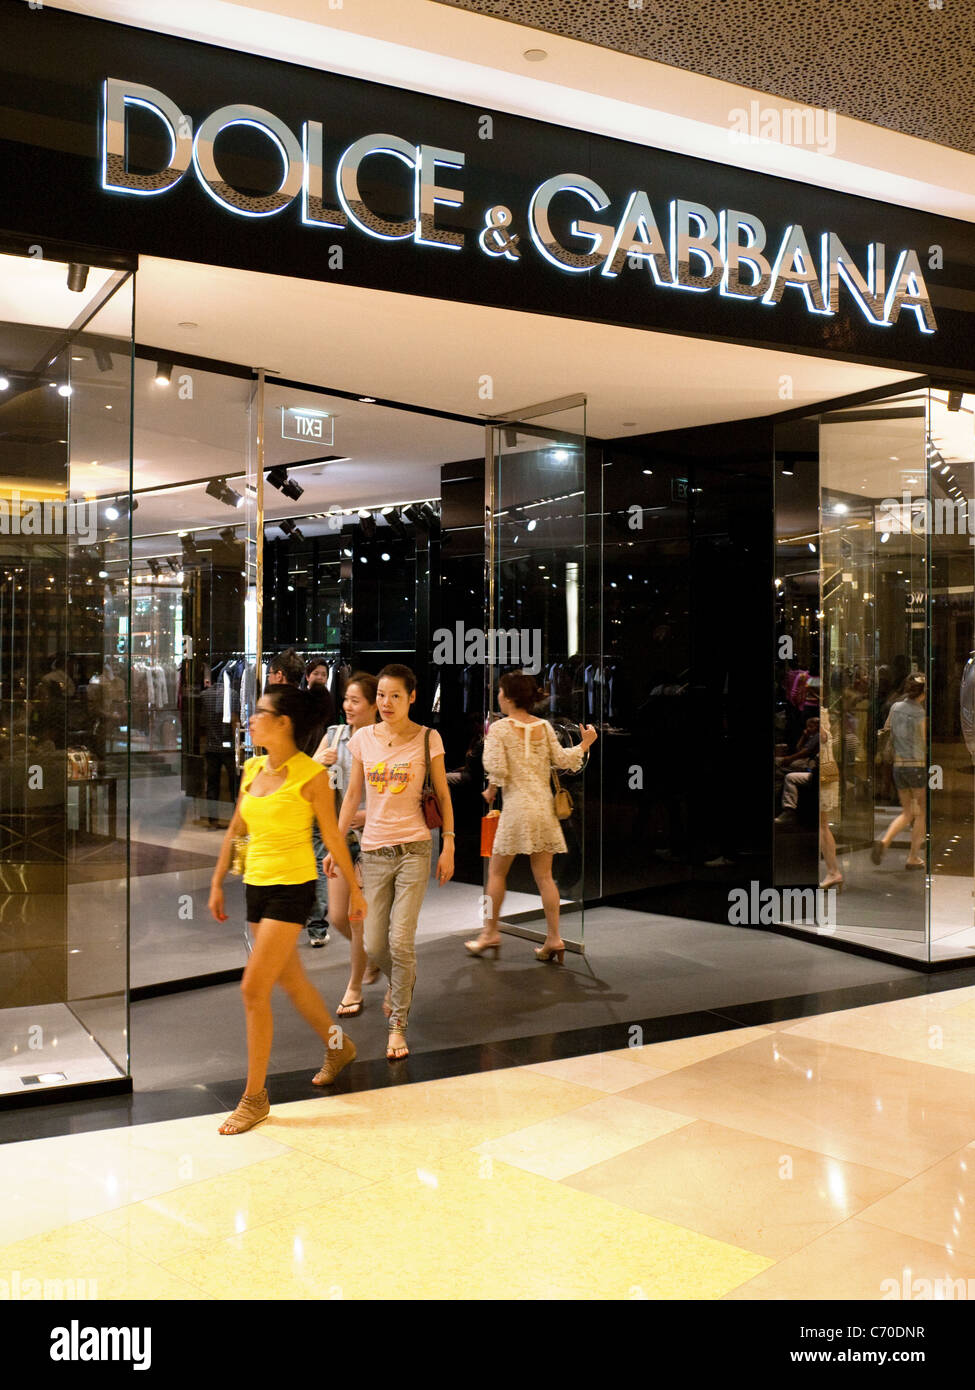 dolce and gabbana outlet store locations